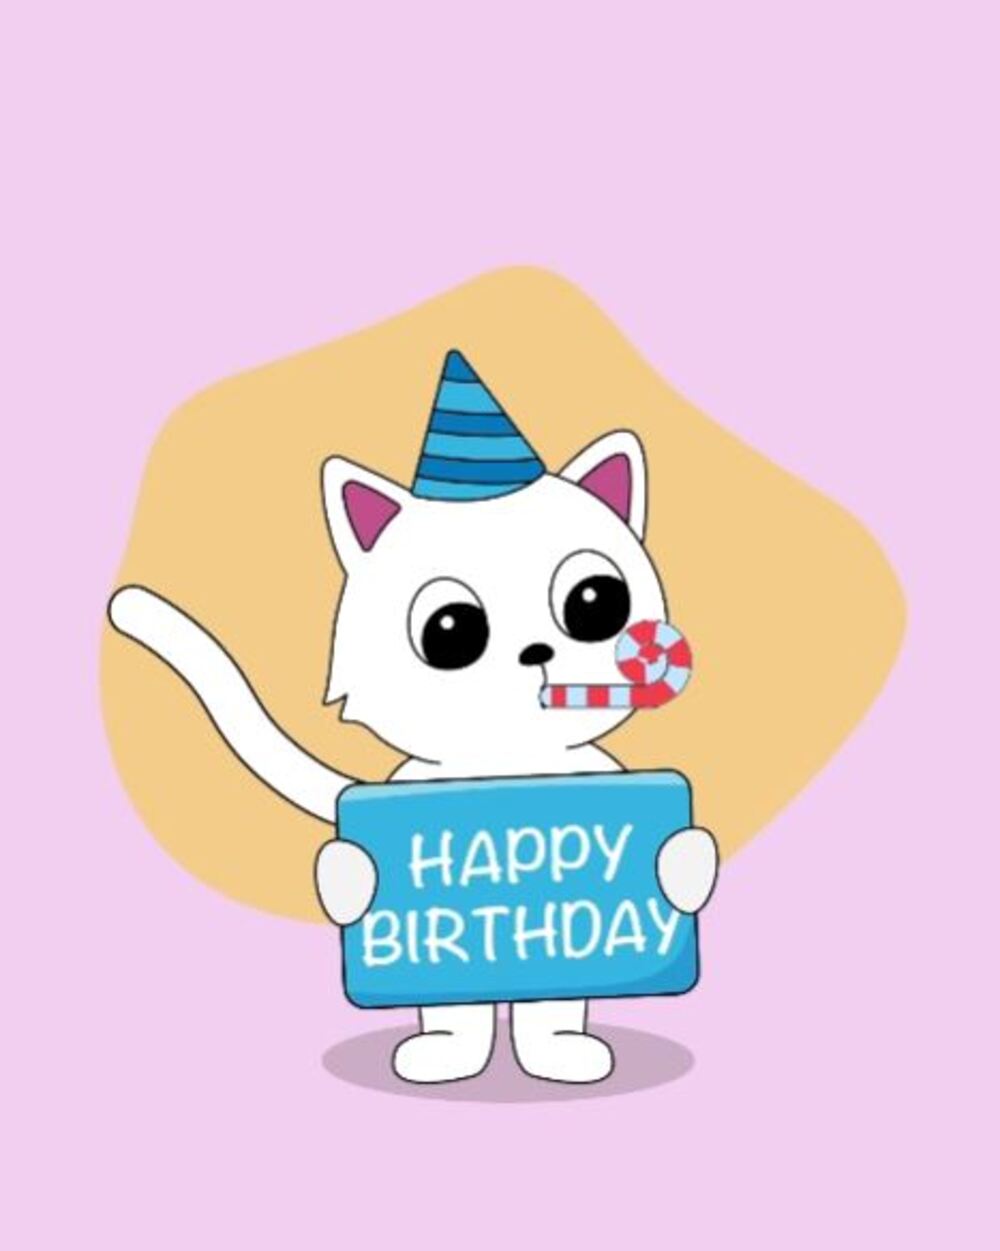 1 20+ Cute and Funny Happy Birthday Free Animated GIFs